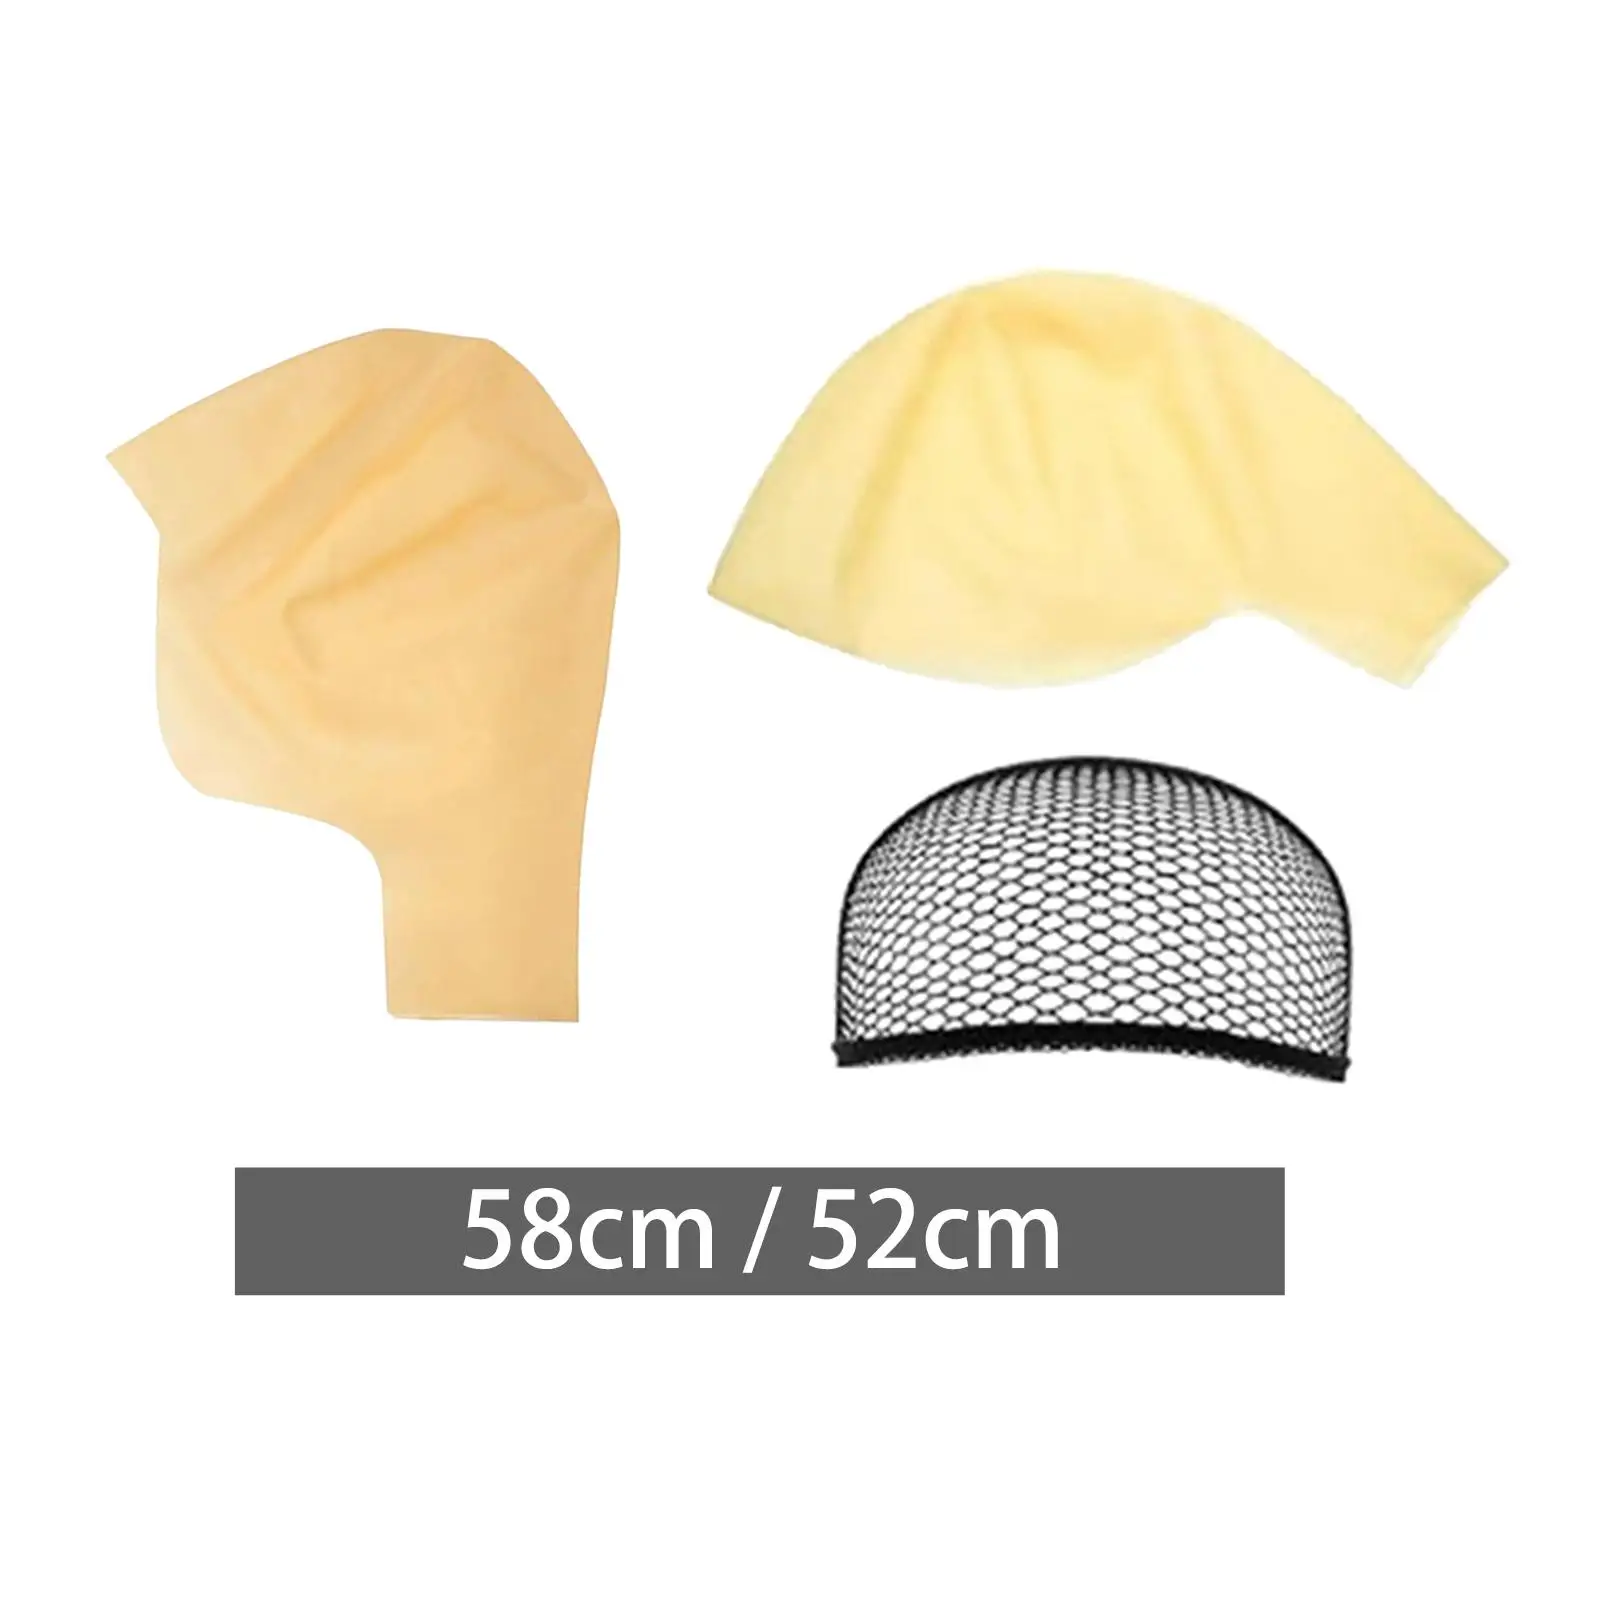 Skinhead Cap Durable Comfortable Cosplay Costume Accessories for Movie Prop